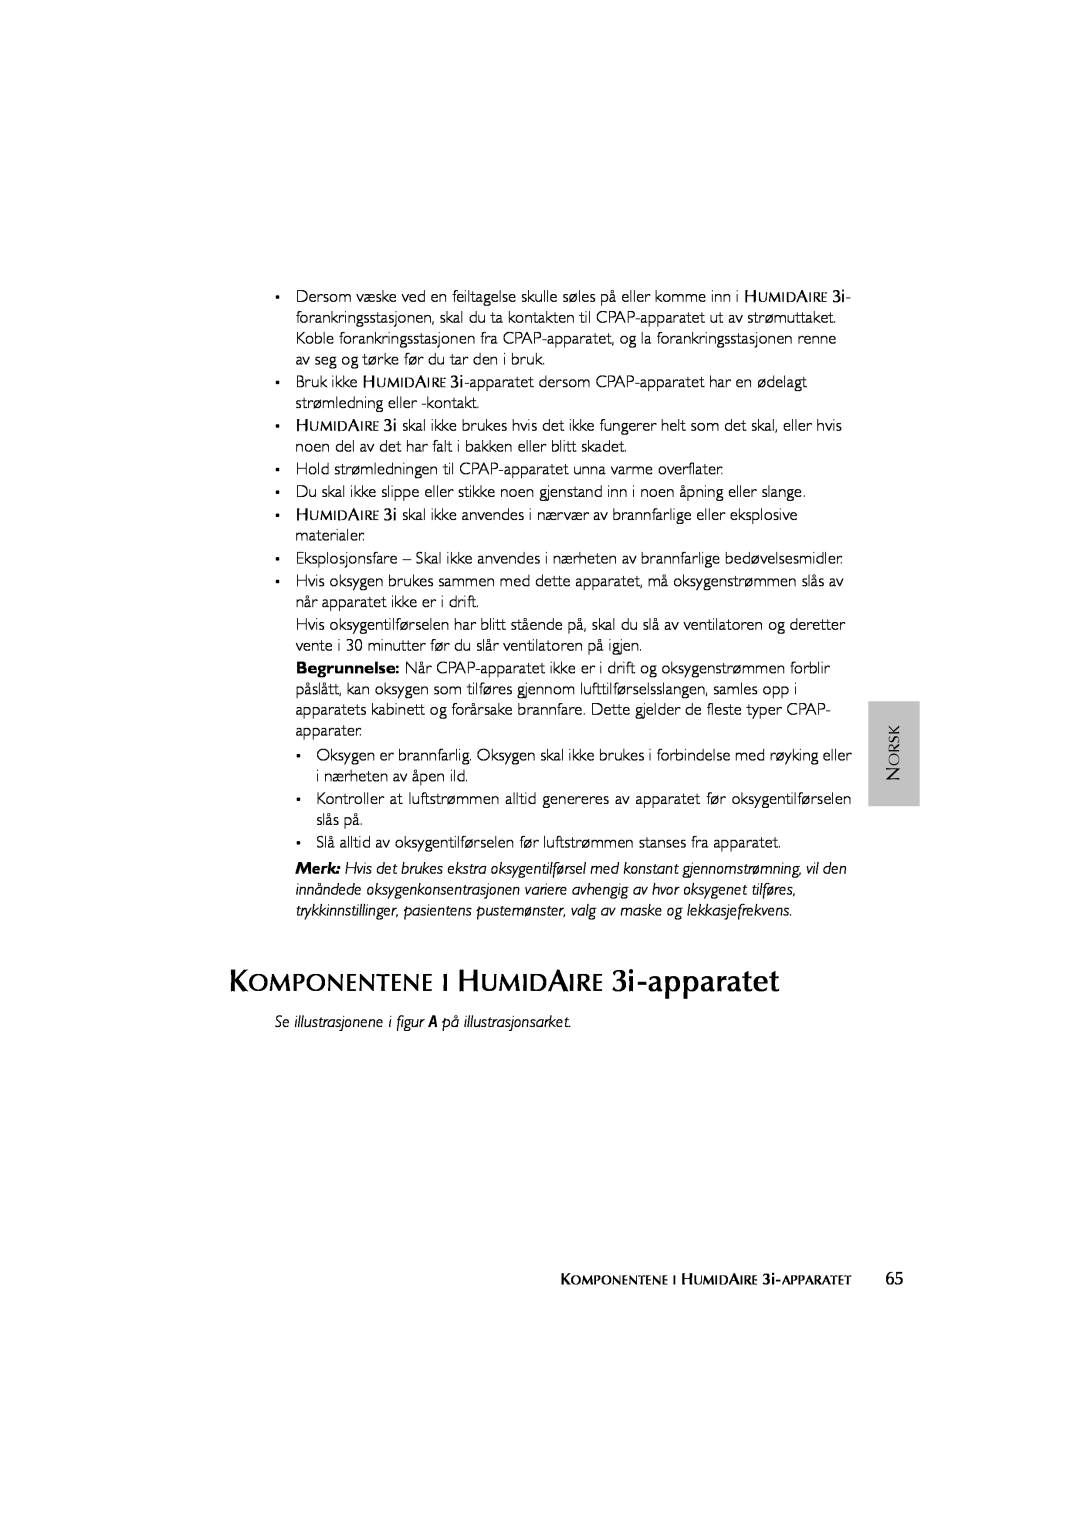 ResMed Humidifier user manual KOMPONENTENE I HUMIDAIRE 3i-apparatet 